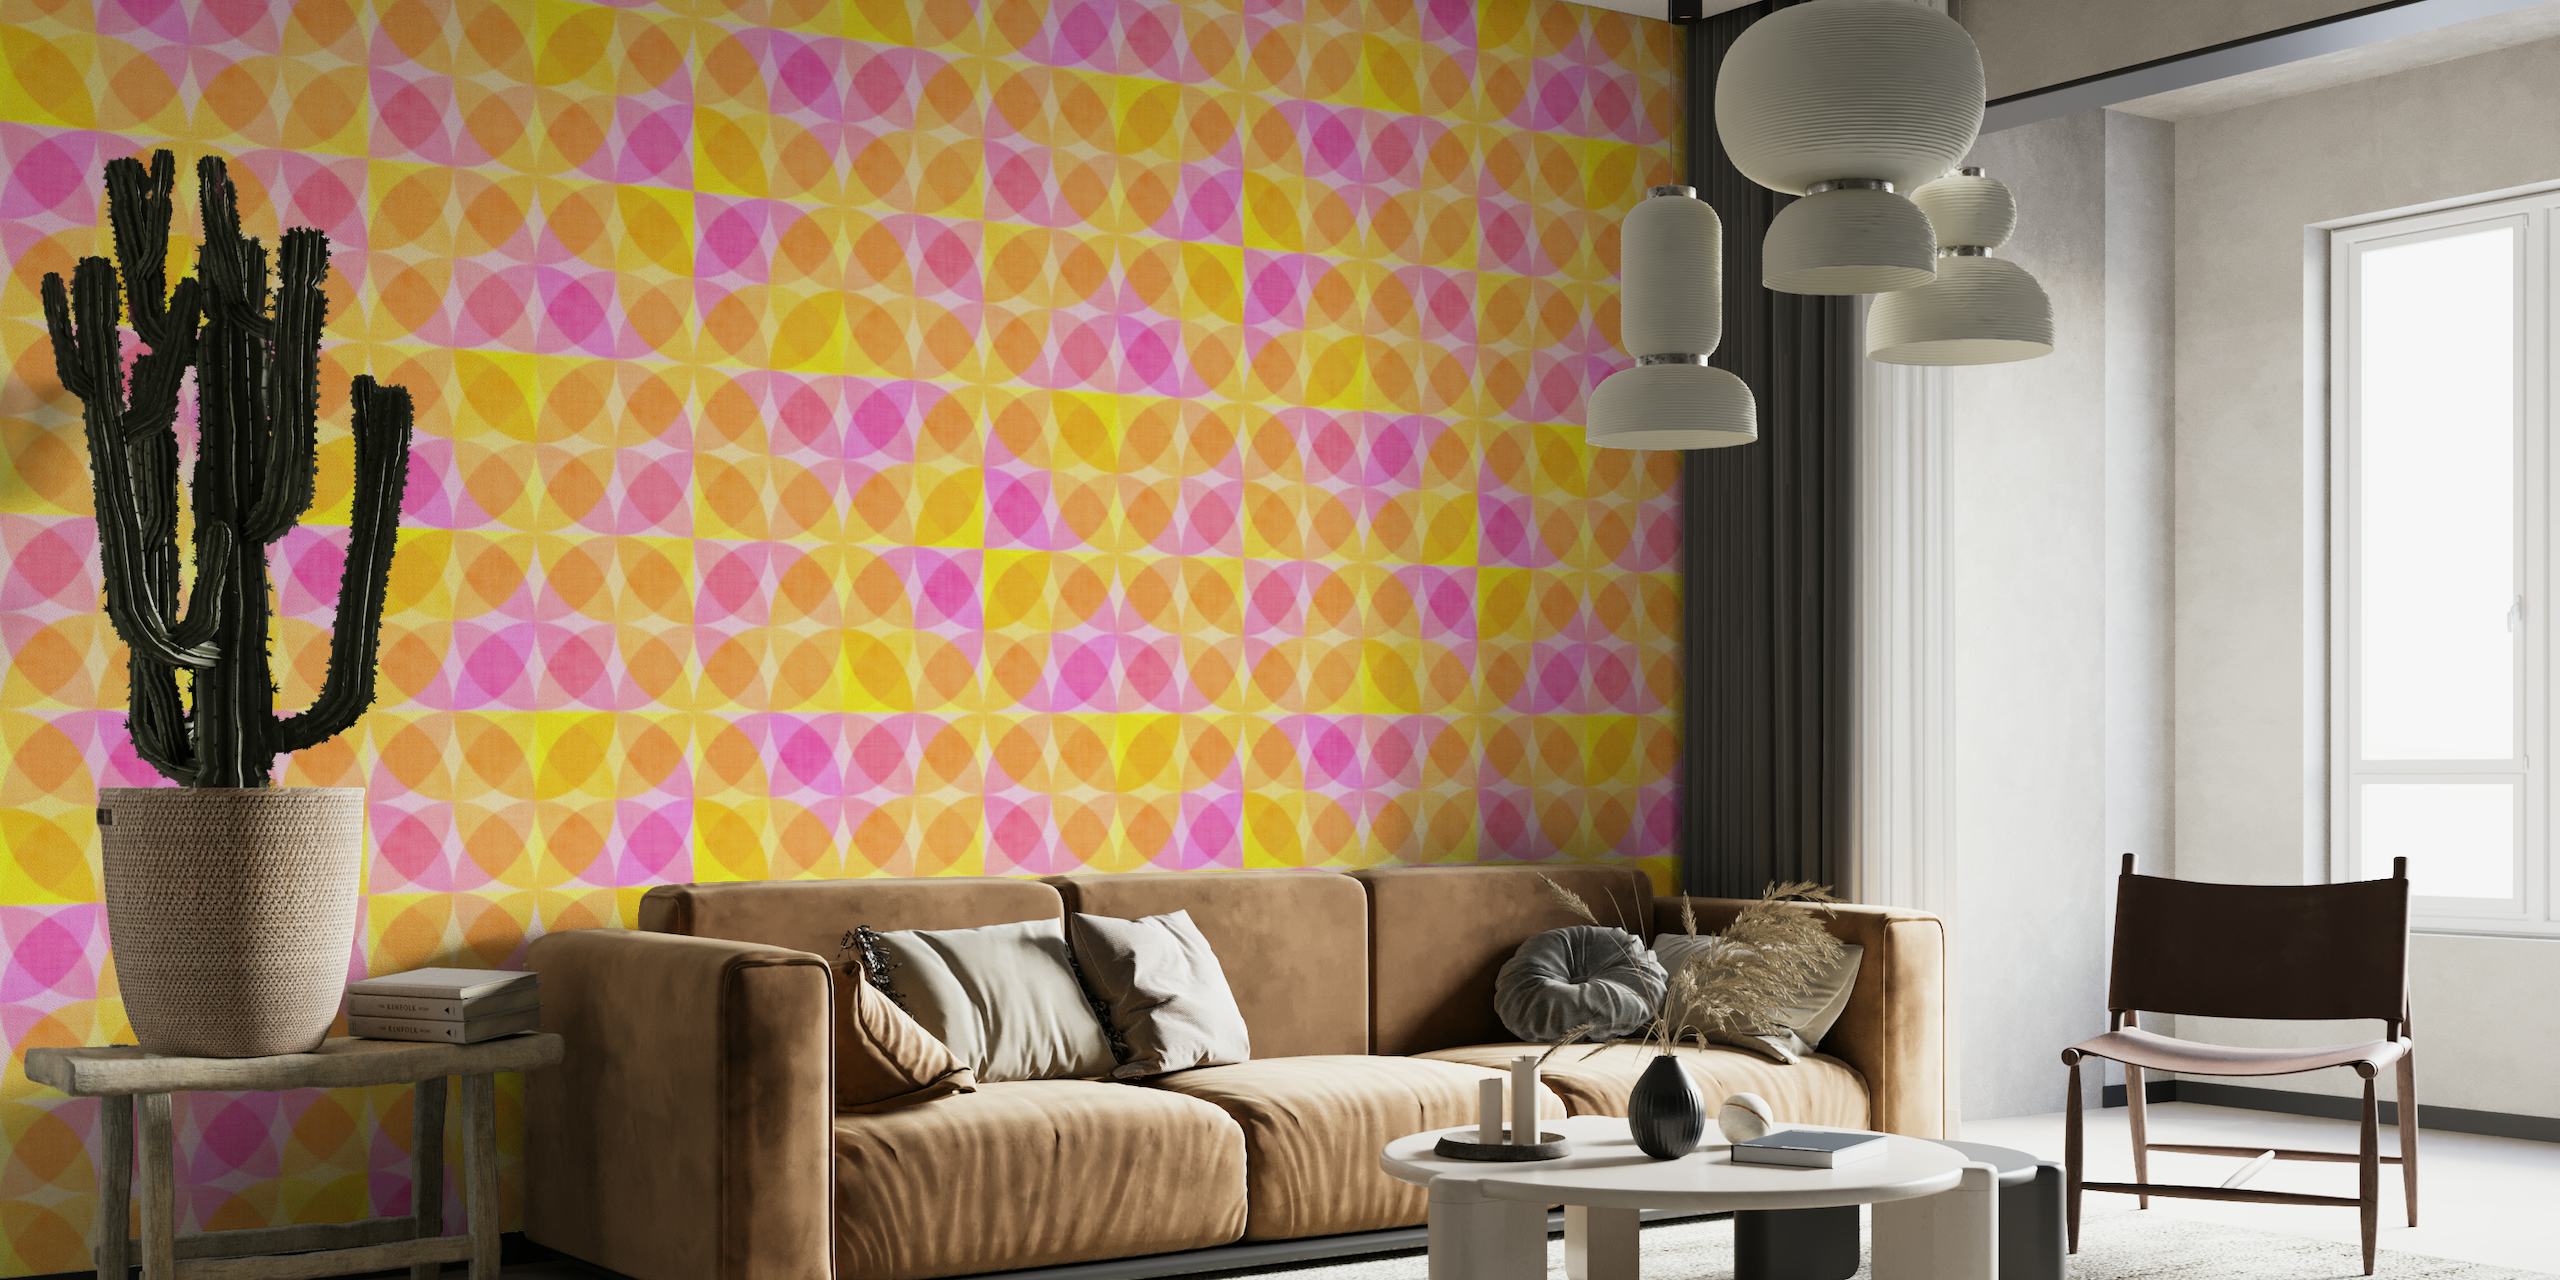 Party Geometric Shapes Pink Orange and Yellow tapete